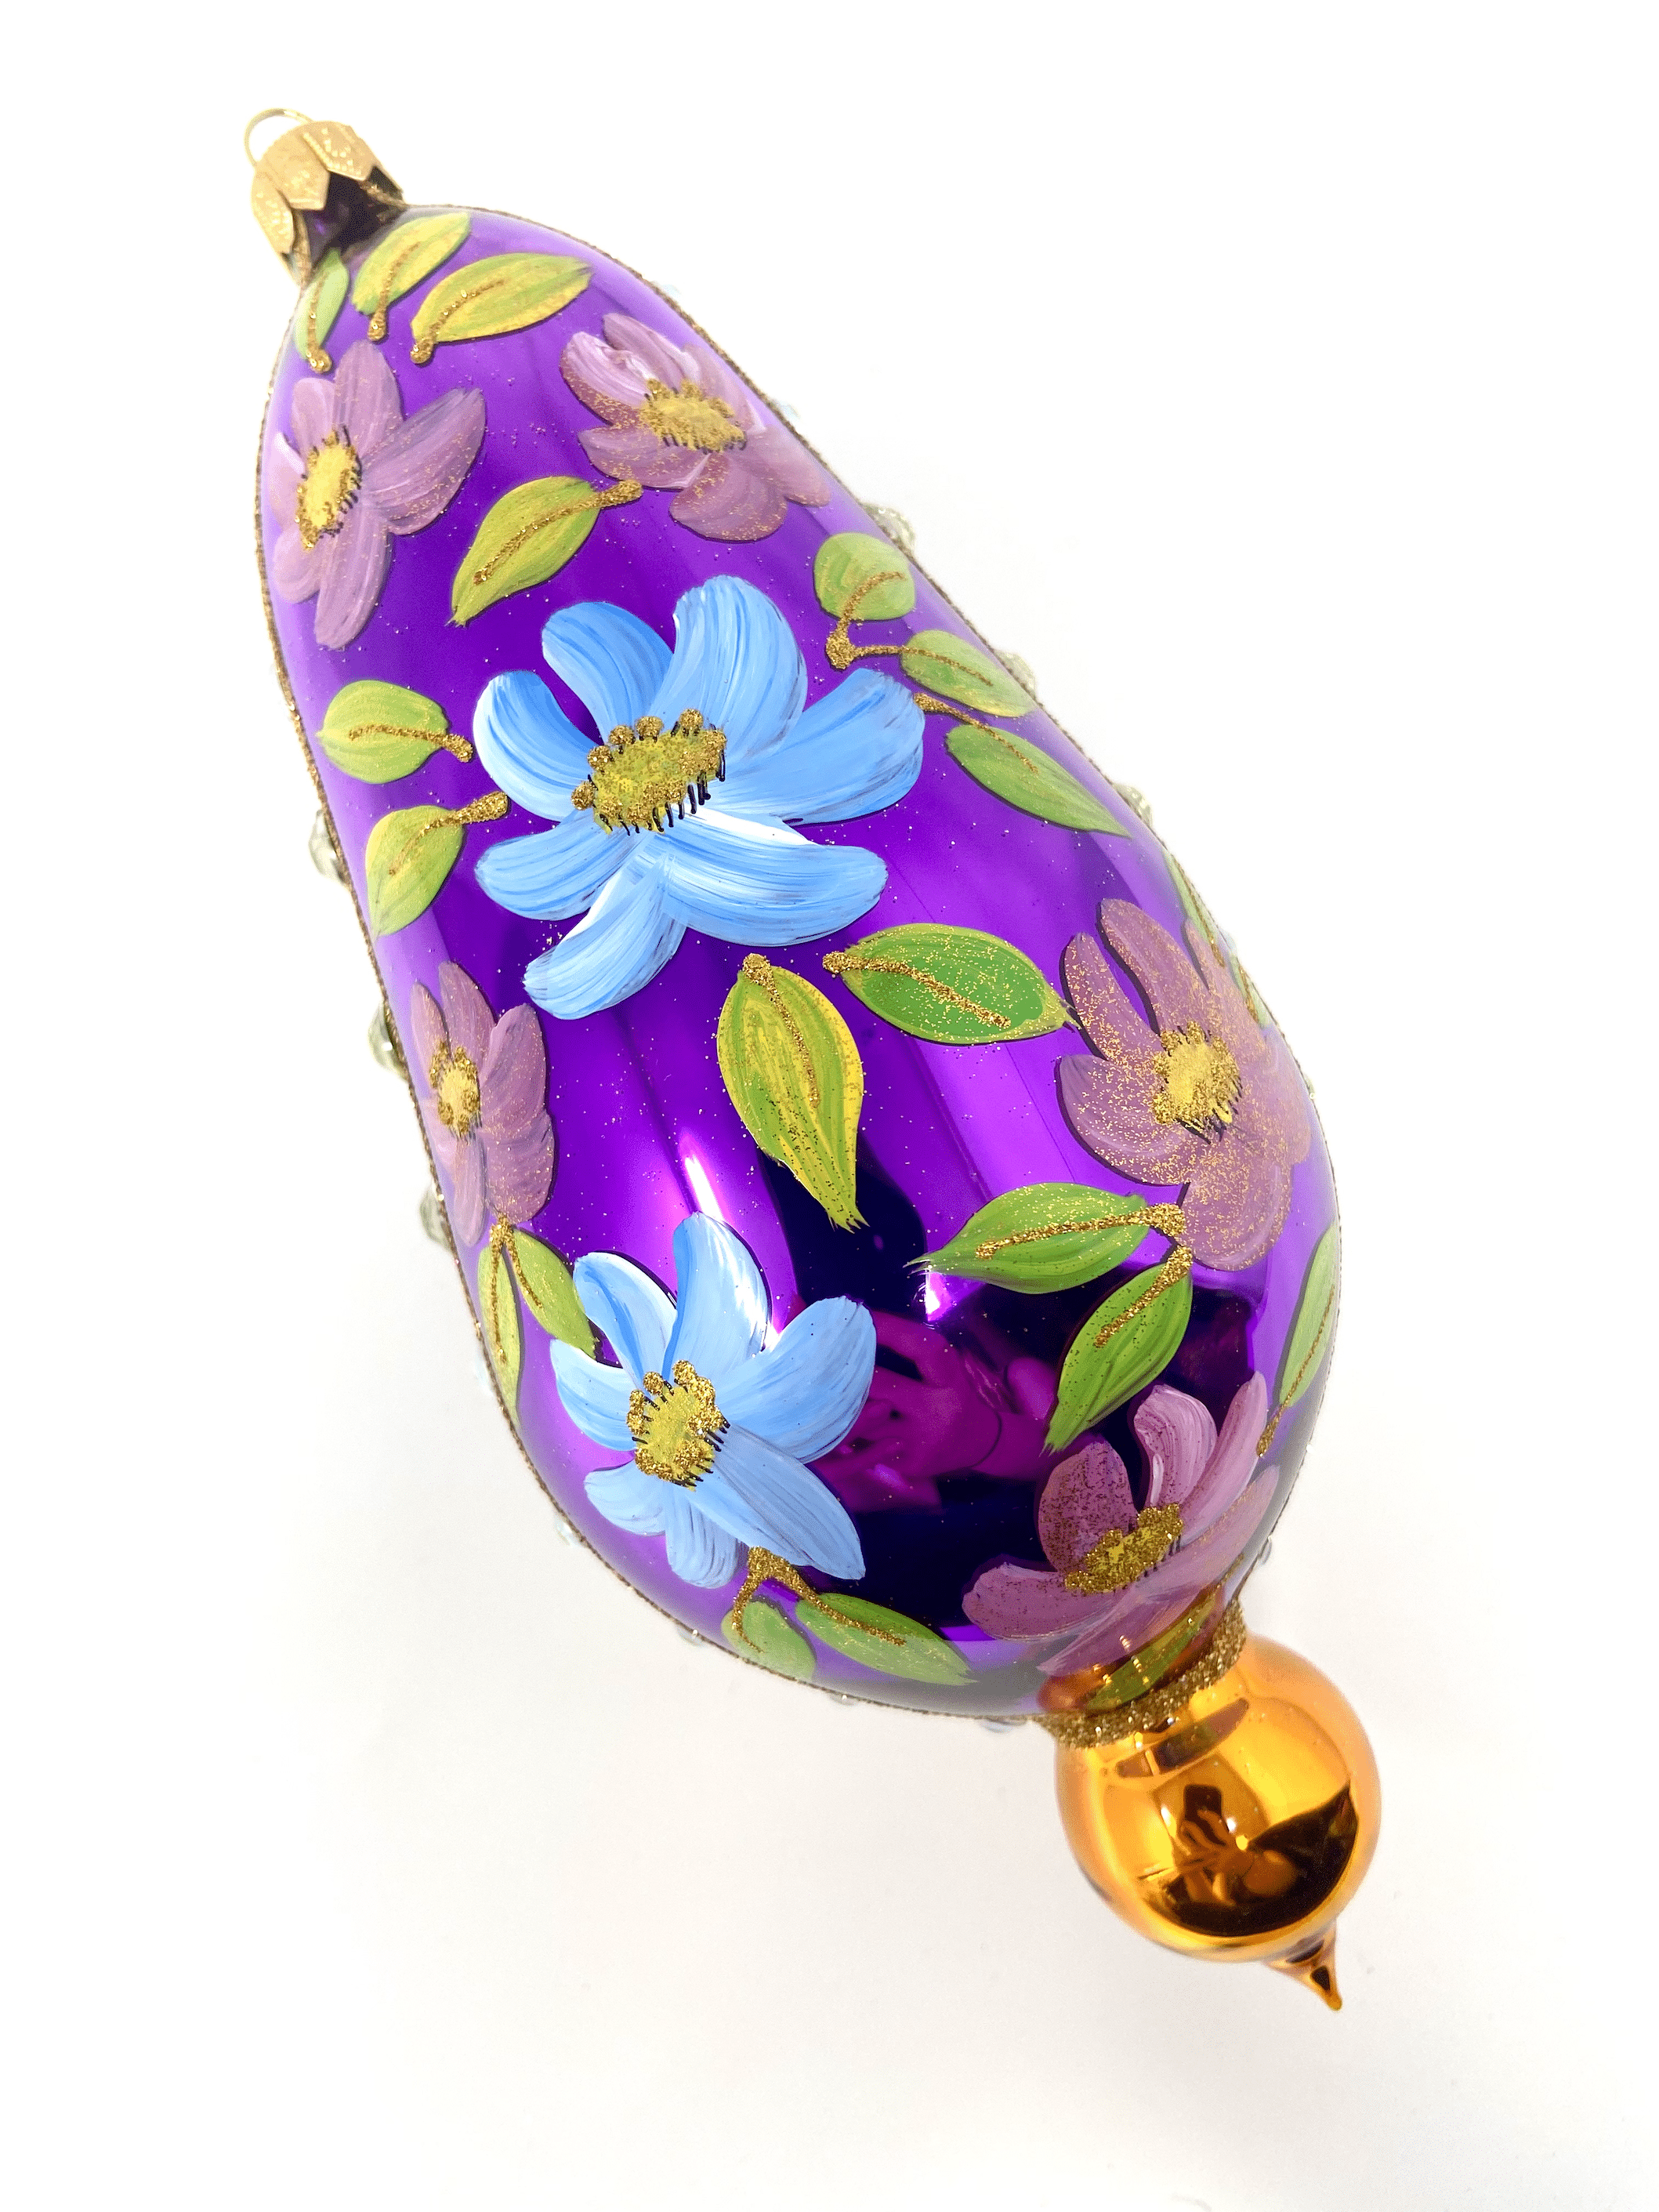 Purple eggplant shaped ornament featuring gemstones, intricate gold detailing, and hand painted floral blooms. A Christmas polish glass ornament. Floral Escape Floral Fetish.